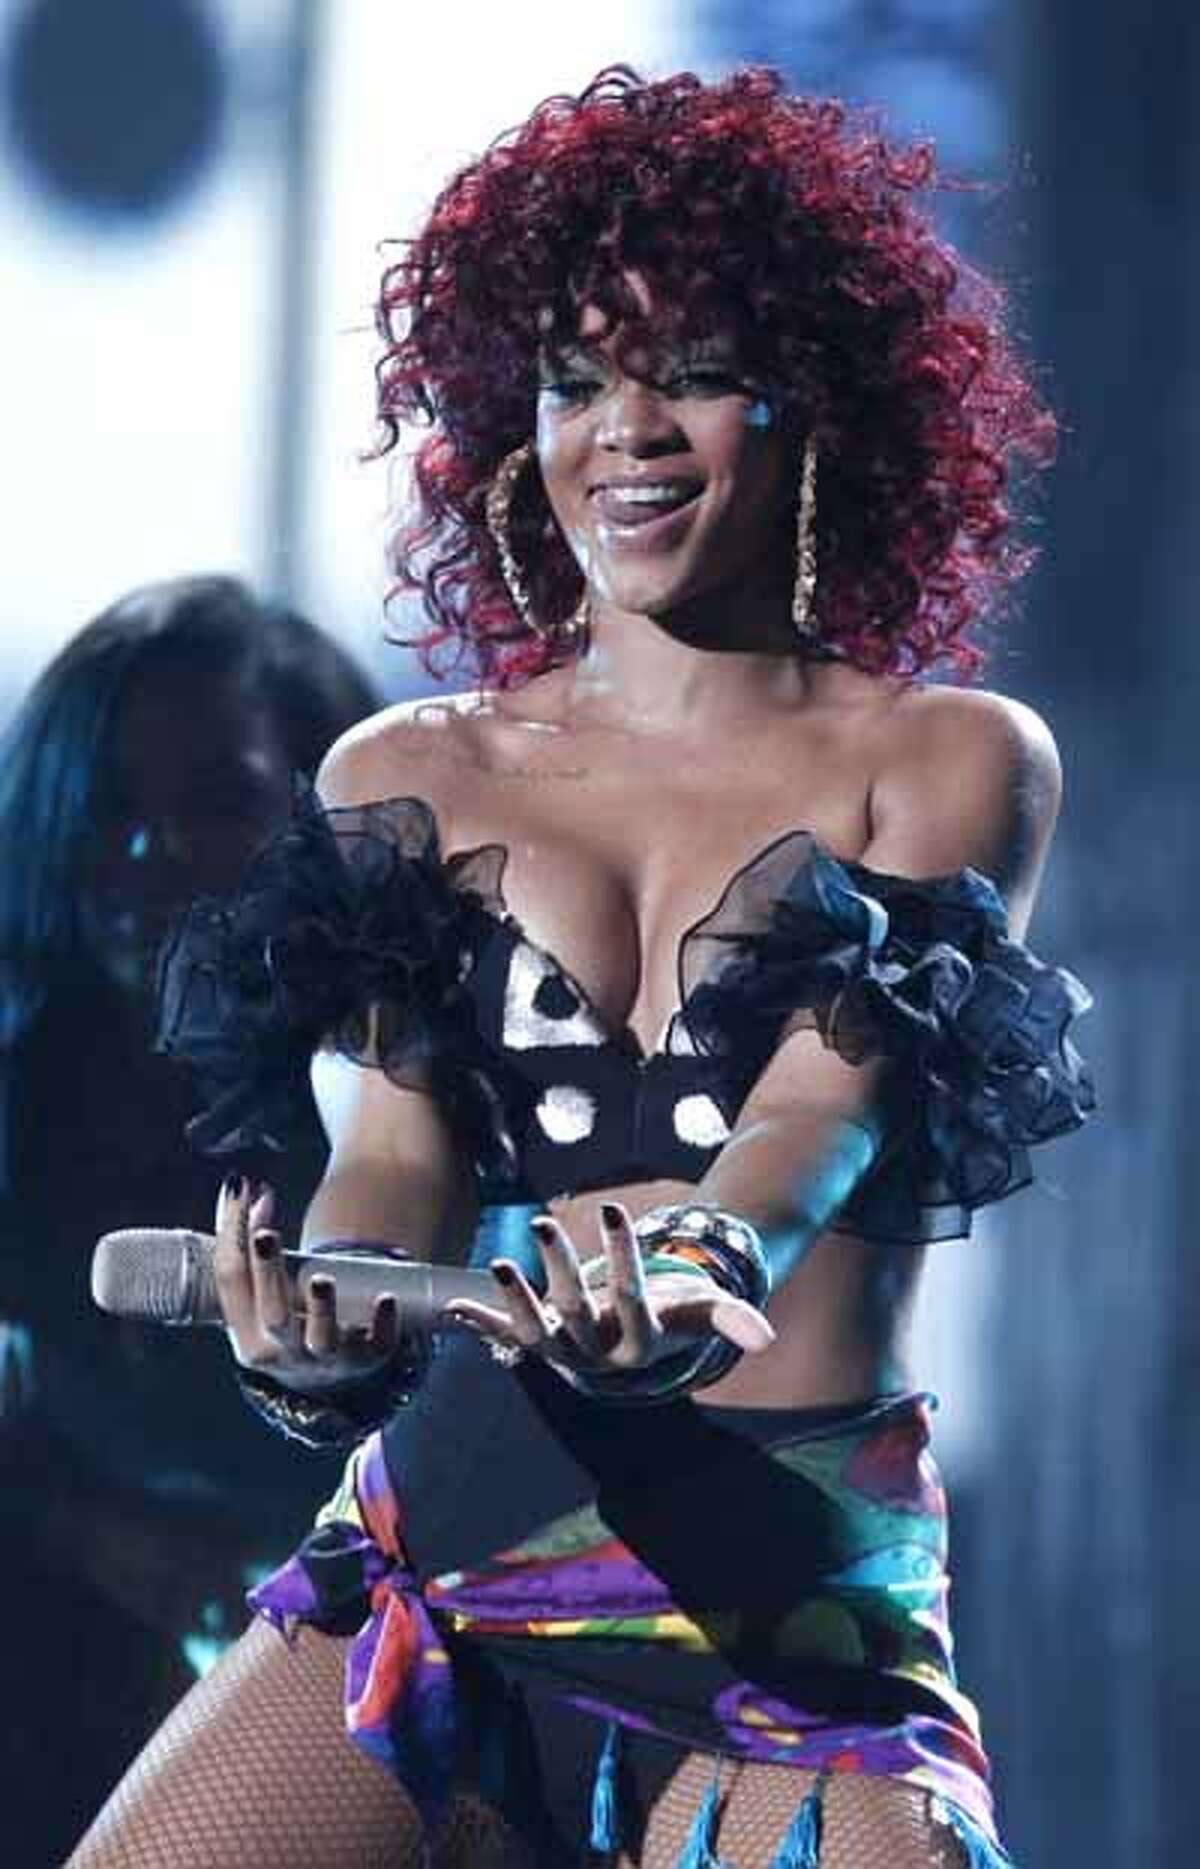 Watch the video: Rihanna's 'Man Down' Rihanna defends video, says victims need a voice NEW YORK (AP) -- Rihanna is defending her latest music video, which opens with a man being shot in the head. "Man Down," which premiered Tuesday on BET, is a song about a girl who shoots her abuser in public. The video also portrays sexual assault. On Tuesday, the Parents Television Council called the clip "disturbing" and asked BET to stop airing it. But on Thursday's "106 & Park," BET's music video countdown show, Rihanna said the video is "art with a message." "We just wanted to hone in on a very serious matter that people are afraid to address, especially if you've been victimized in this scenario," Rihanna said. BET says it will continue to play the video, explaining that the network "has a comprehensive set of standards and guidelines that are applied to all of our content" and that Rihanna's video "complied with these guidelines and was approved for air." MTV hasn't played the video. A MTV representative said they're "in the process of reviewing the video." Rihanna, who was attacked by then-boyfriend Chris Brown in February 2009, says she doesn't agree with violence. Brown attacked Rihanna on the eve of the Grammys two years ago. He pleaded guilty to a felony and was sentenced to five years' probation. "I've been abused in the past and you don't see me running around killing people in my spare time," she said. The "Man Down" clip was directed by Anthony Mandler, who has directed other Rihanna videos. (Read complete story)